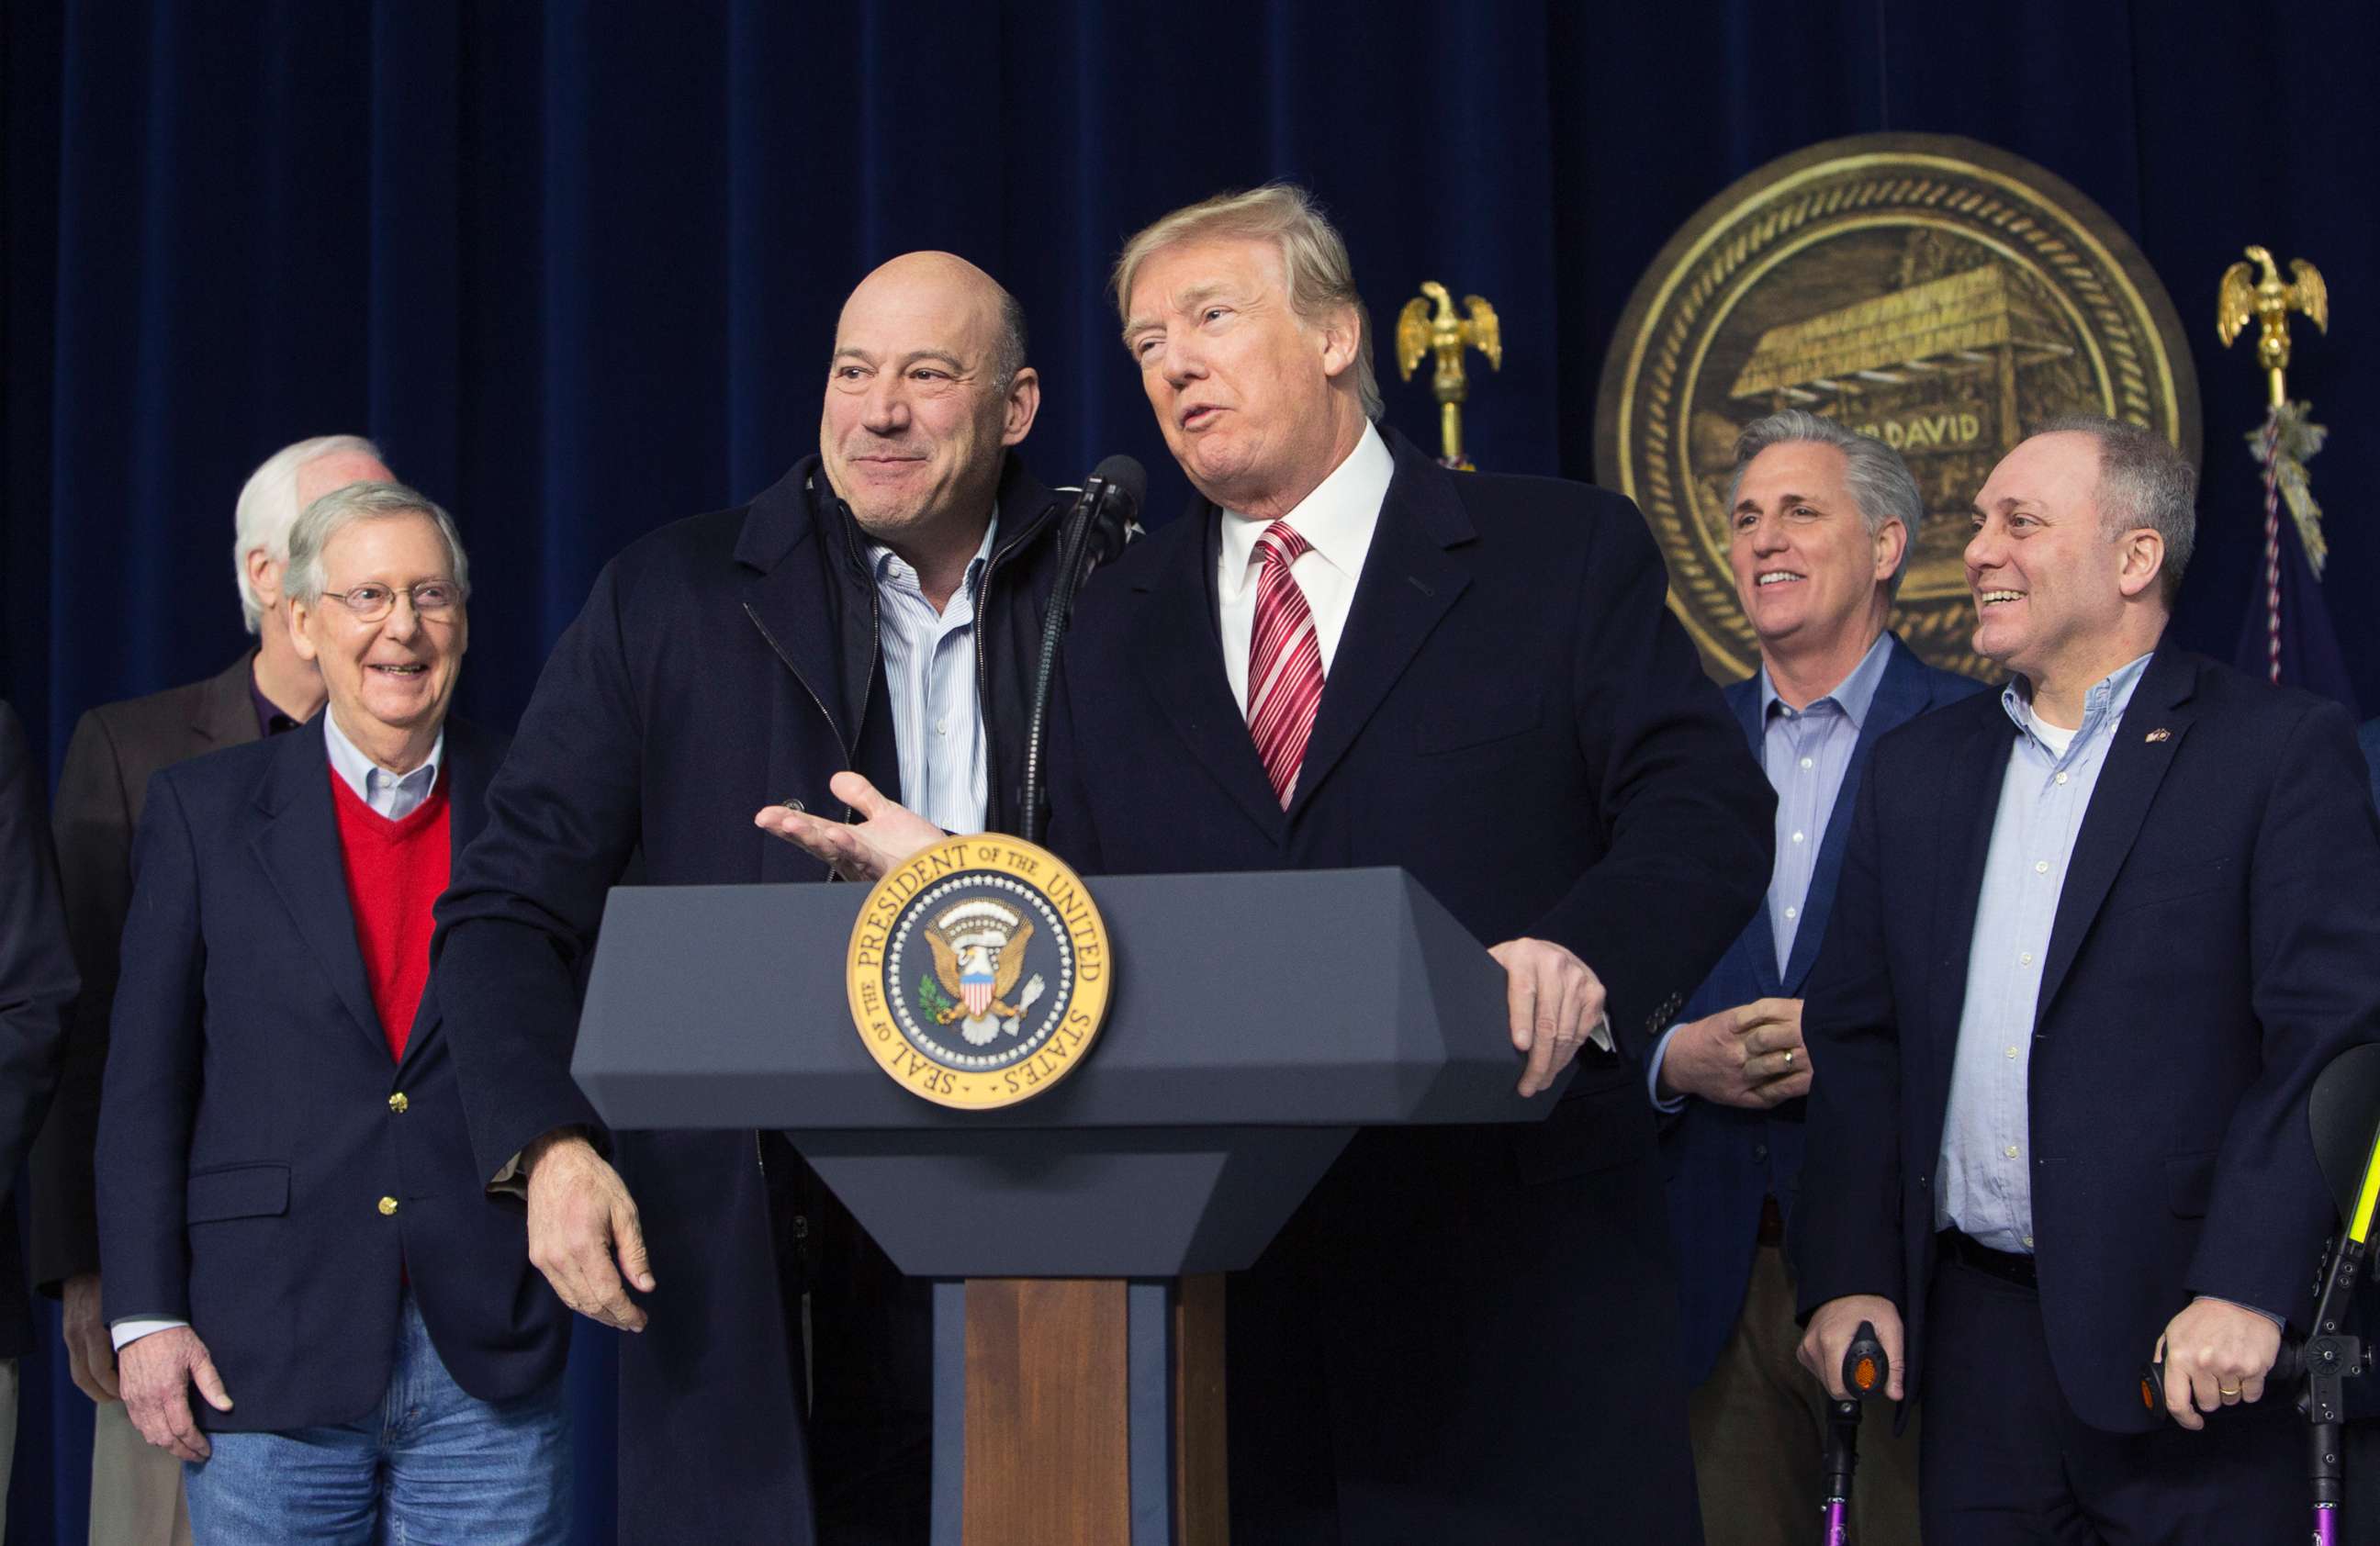 PHOTO: President Donald Trump and National Economic Council Director Gary Cohn affirm their support for each other at Camp David on Jan. 6, 2018 in Thurmont, Md.